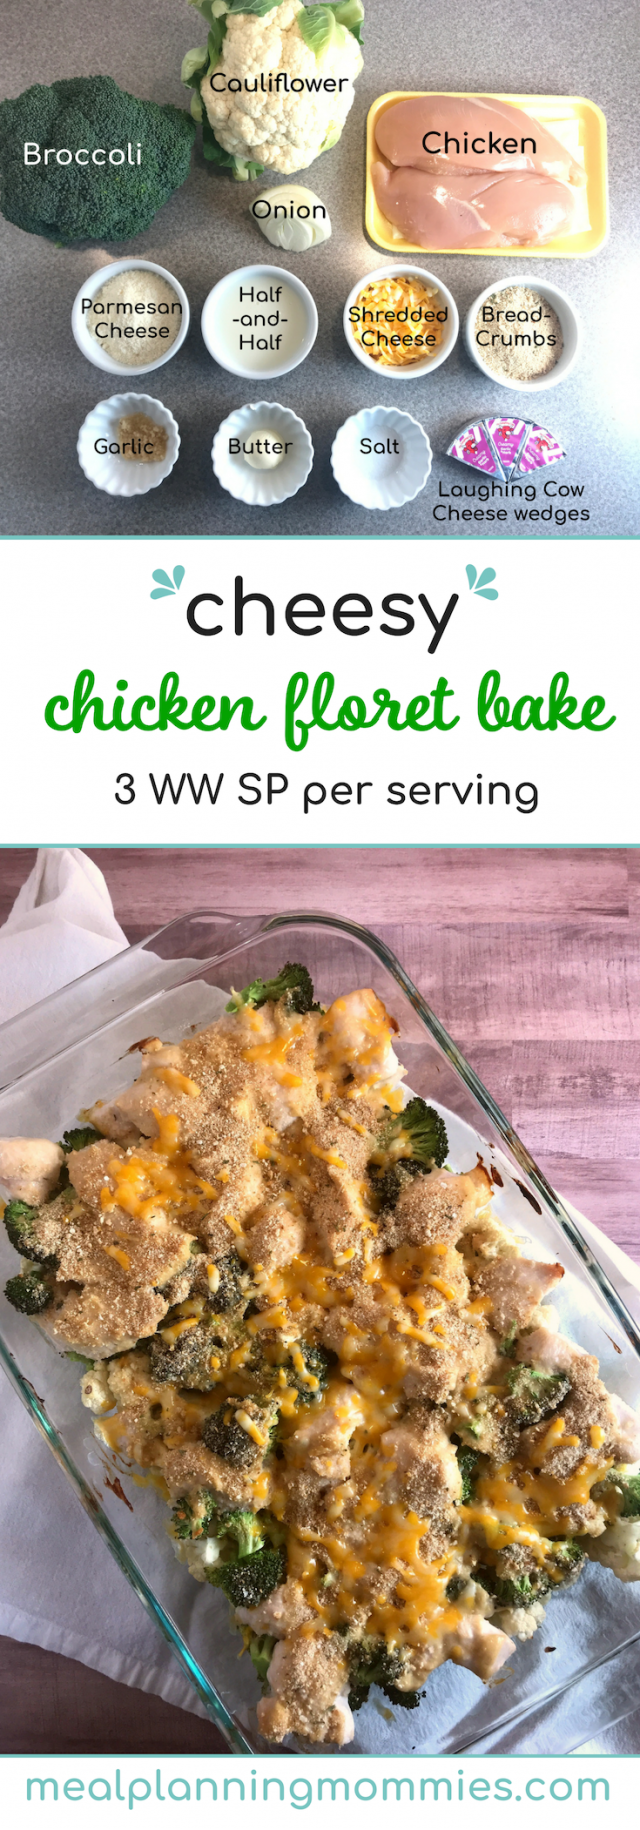 This Cheesy Chicken Floret Bake uses broccoli, cauliflower, rich cheesy sauce, and chicken. Just 3 WW FreeStyle SmartPoints per serving!